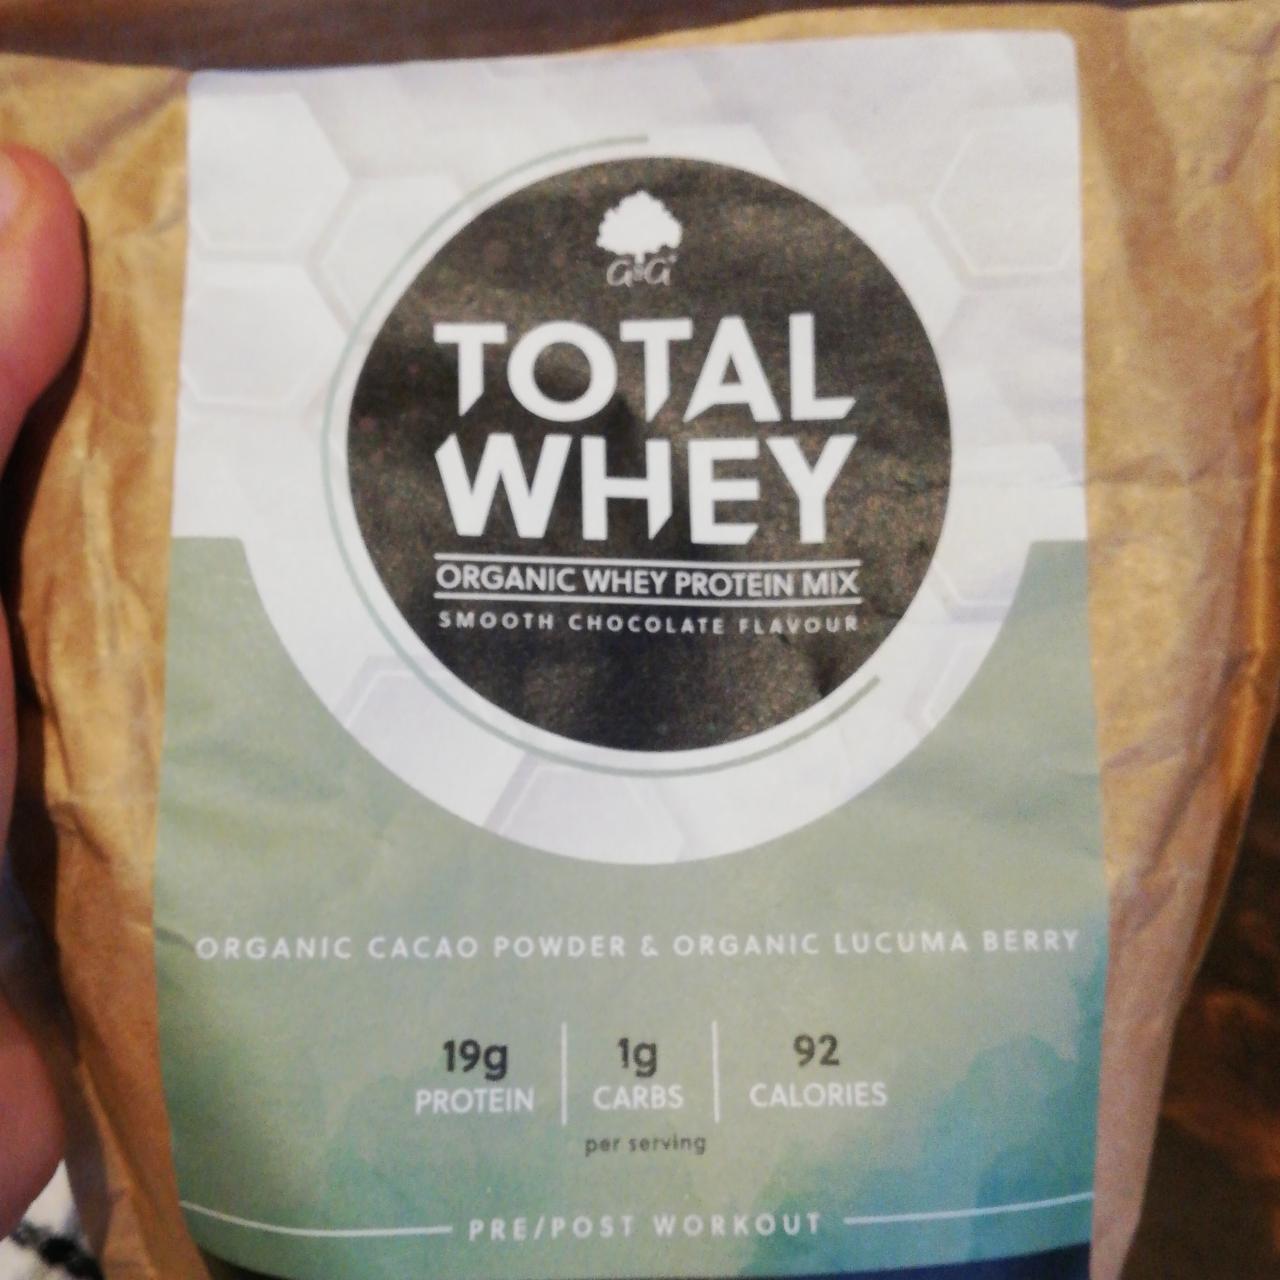 Fotografie - Total whey organic protein mix Smooth chocolate flavour G&G